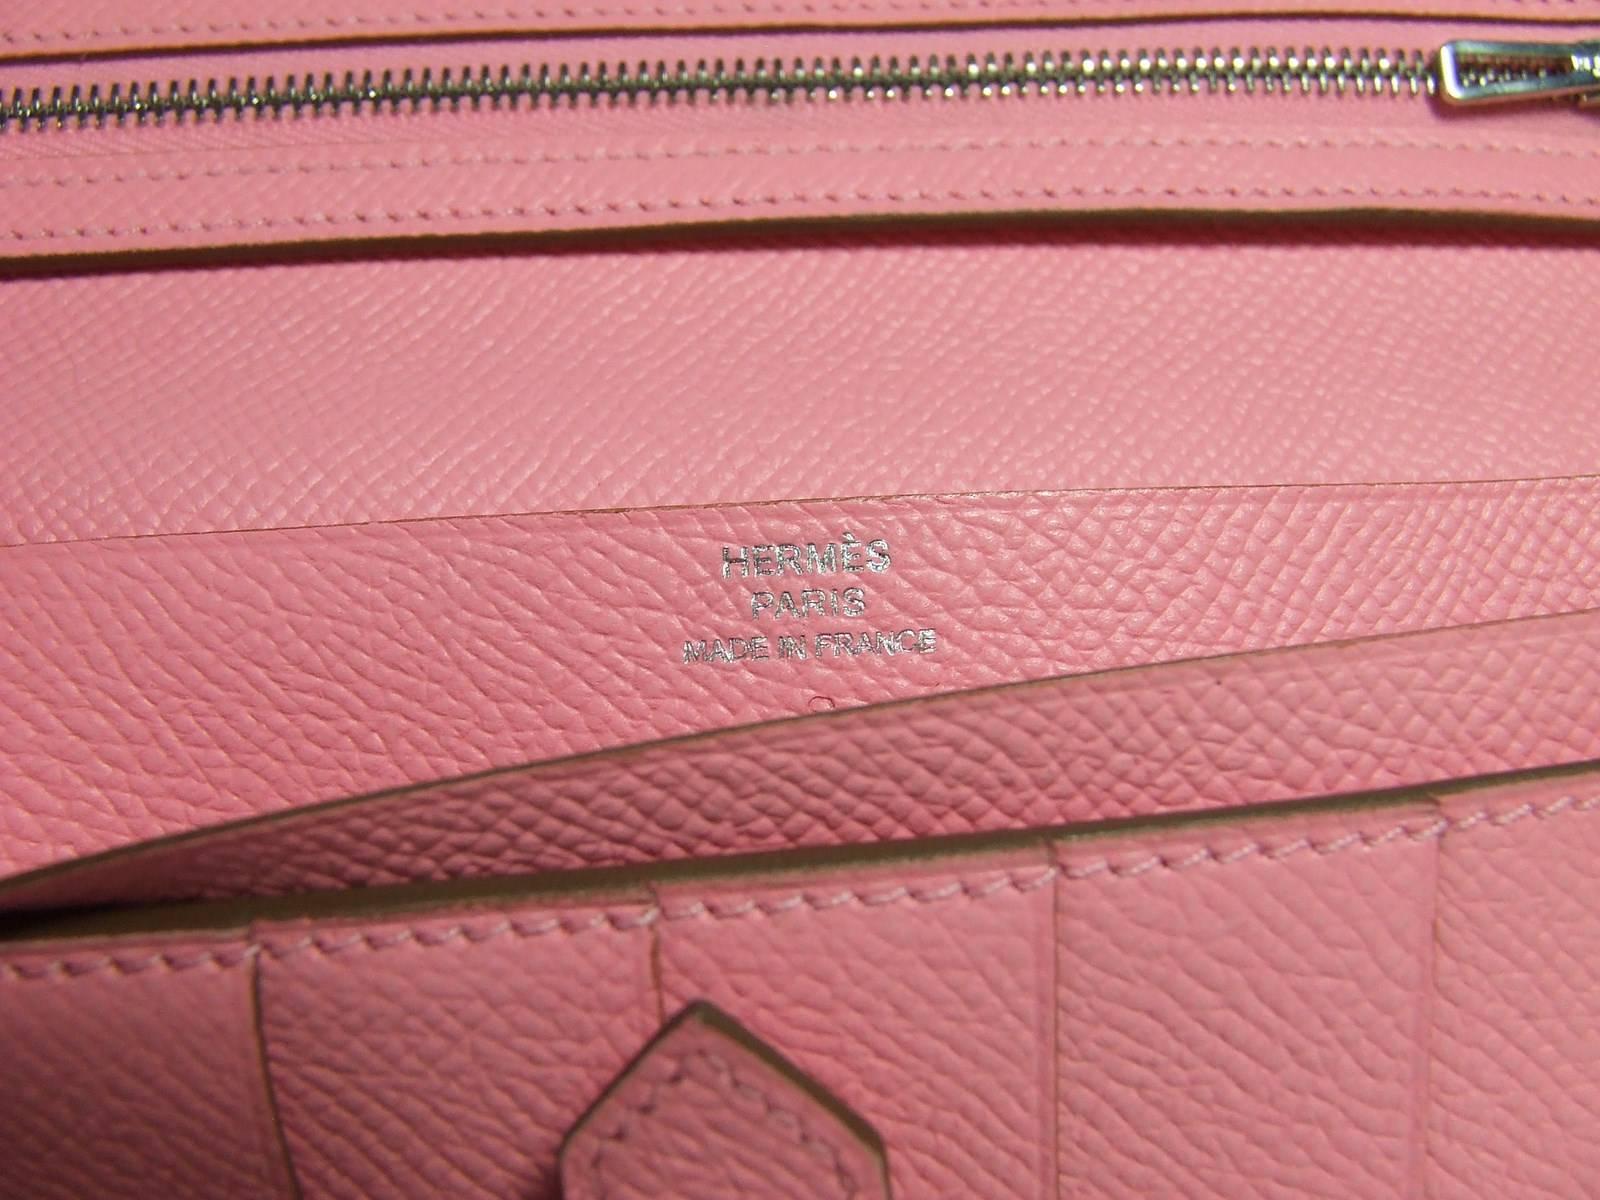 Lovely Hermès Bearn Wallet Rose Confetti Pink Leather Phw 4